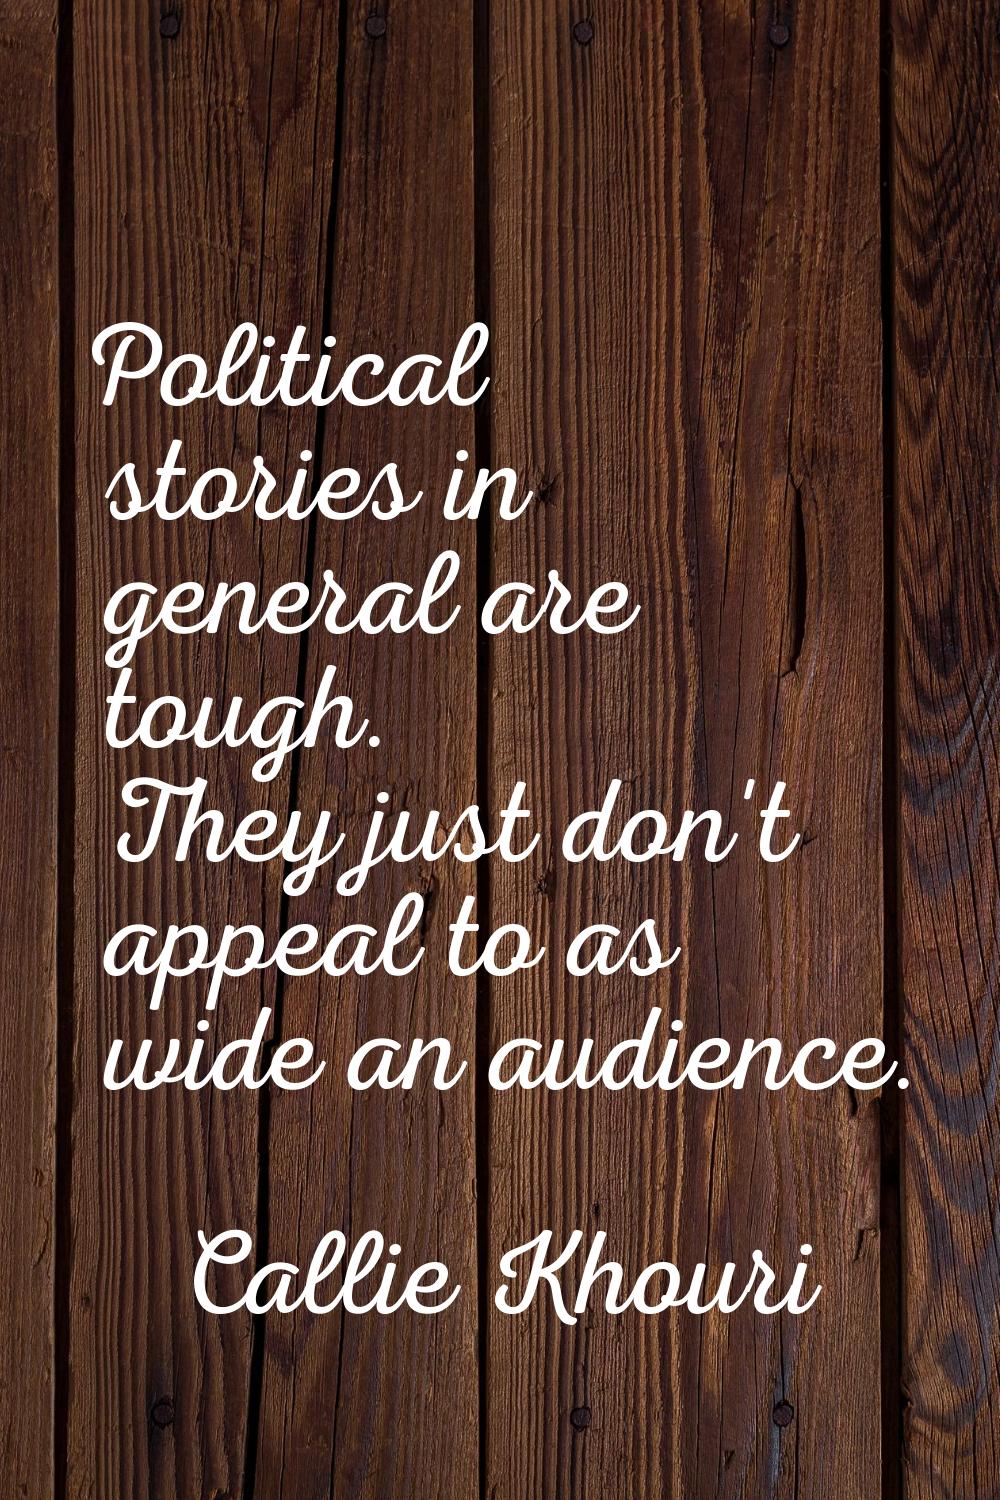 Political stories in general are tough. They just don't appeal to as wide an audience.